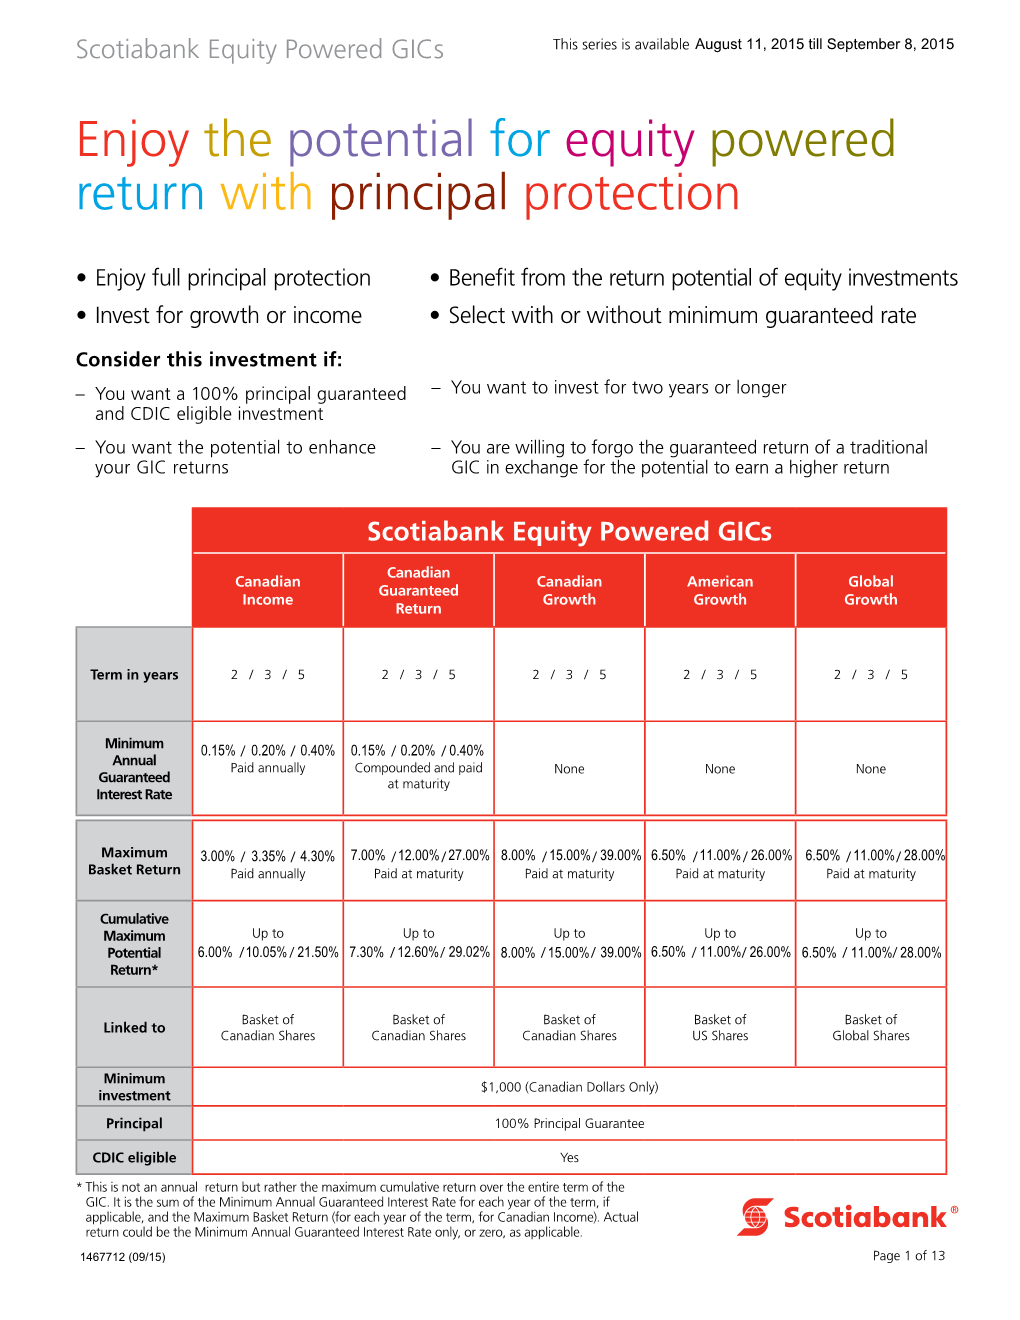 Enjoy the Potential for Equity Powered Return with Principal Protection